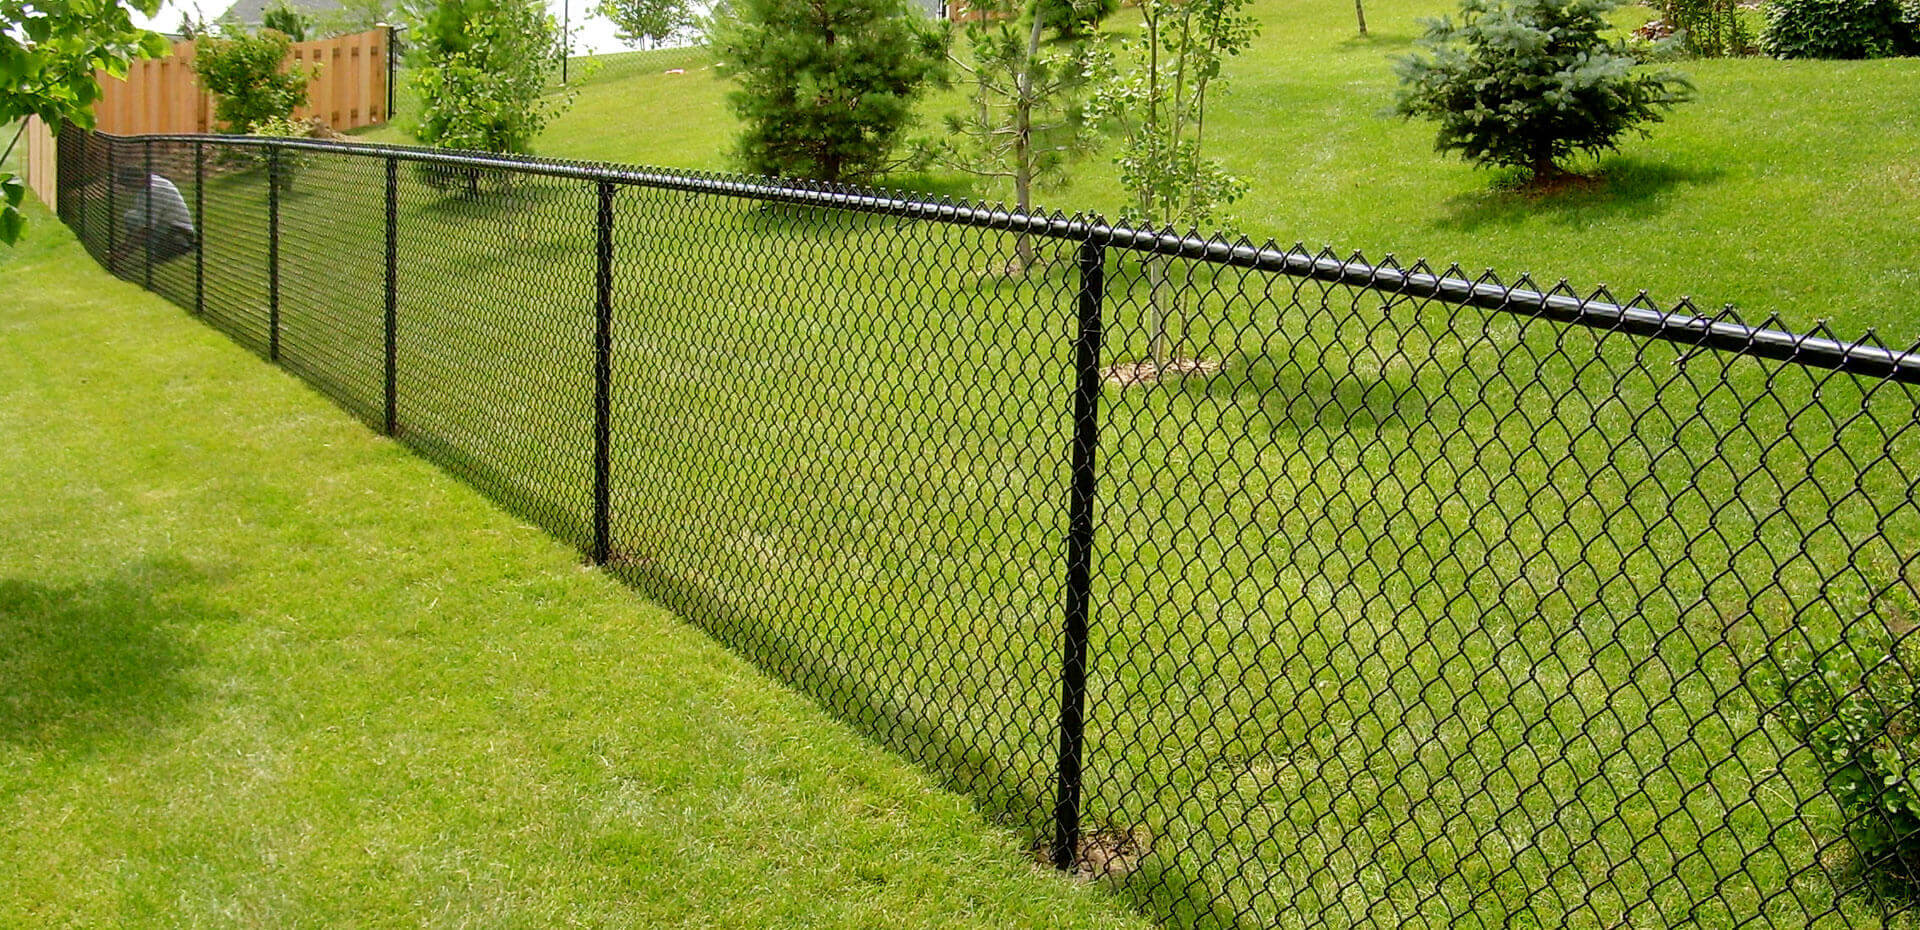 Plastic-coated steel wire fence